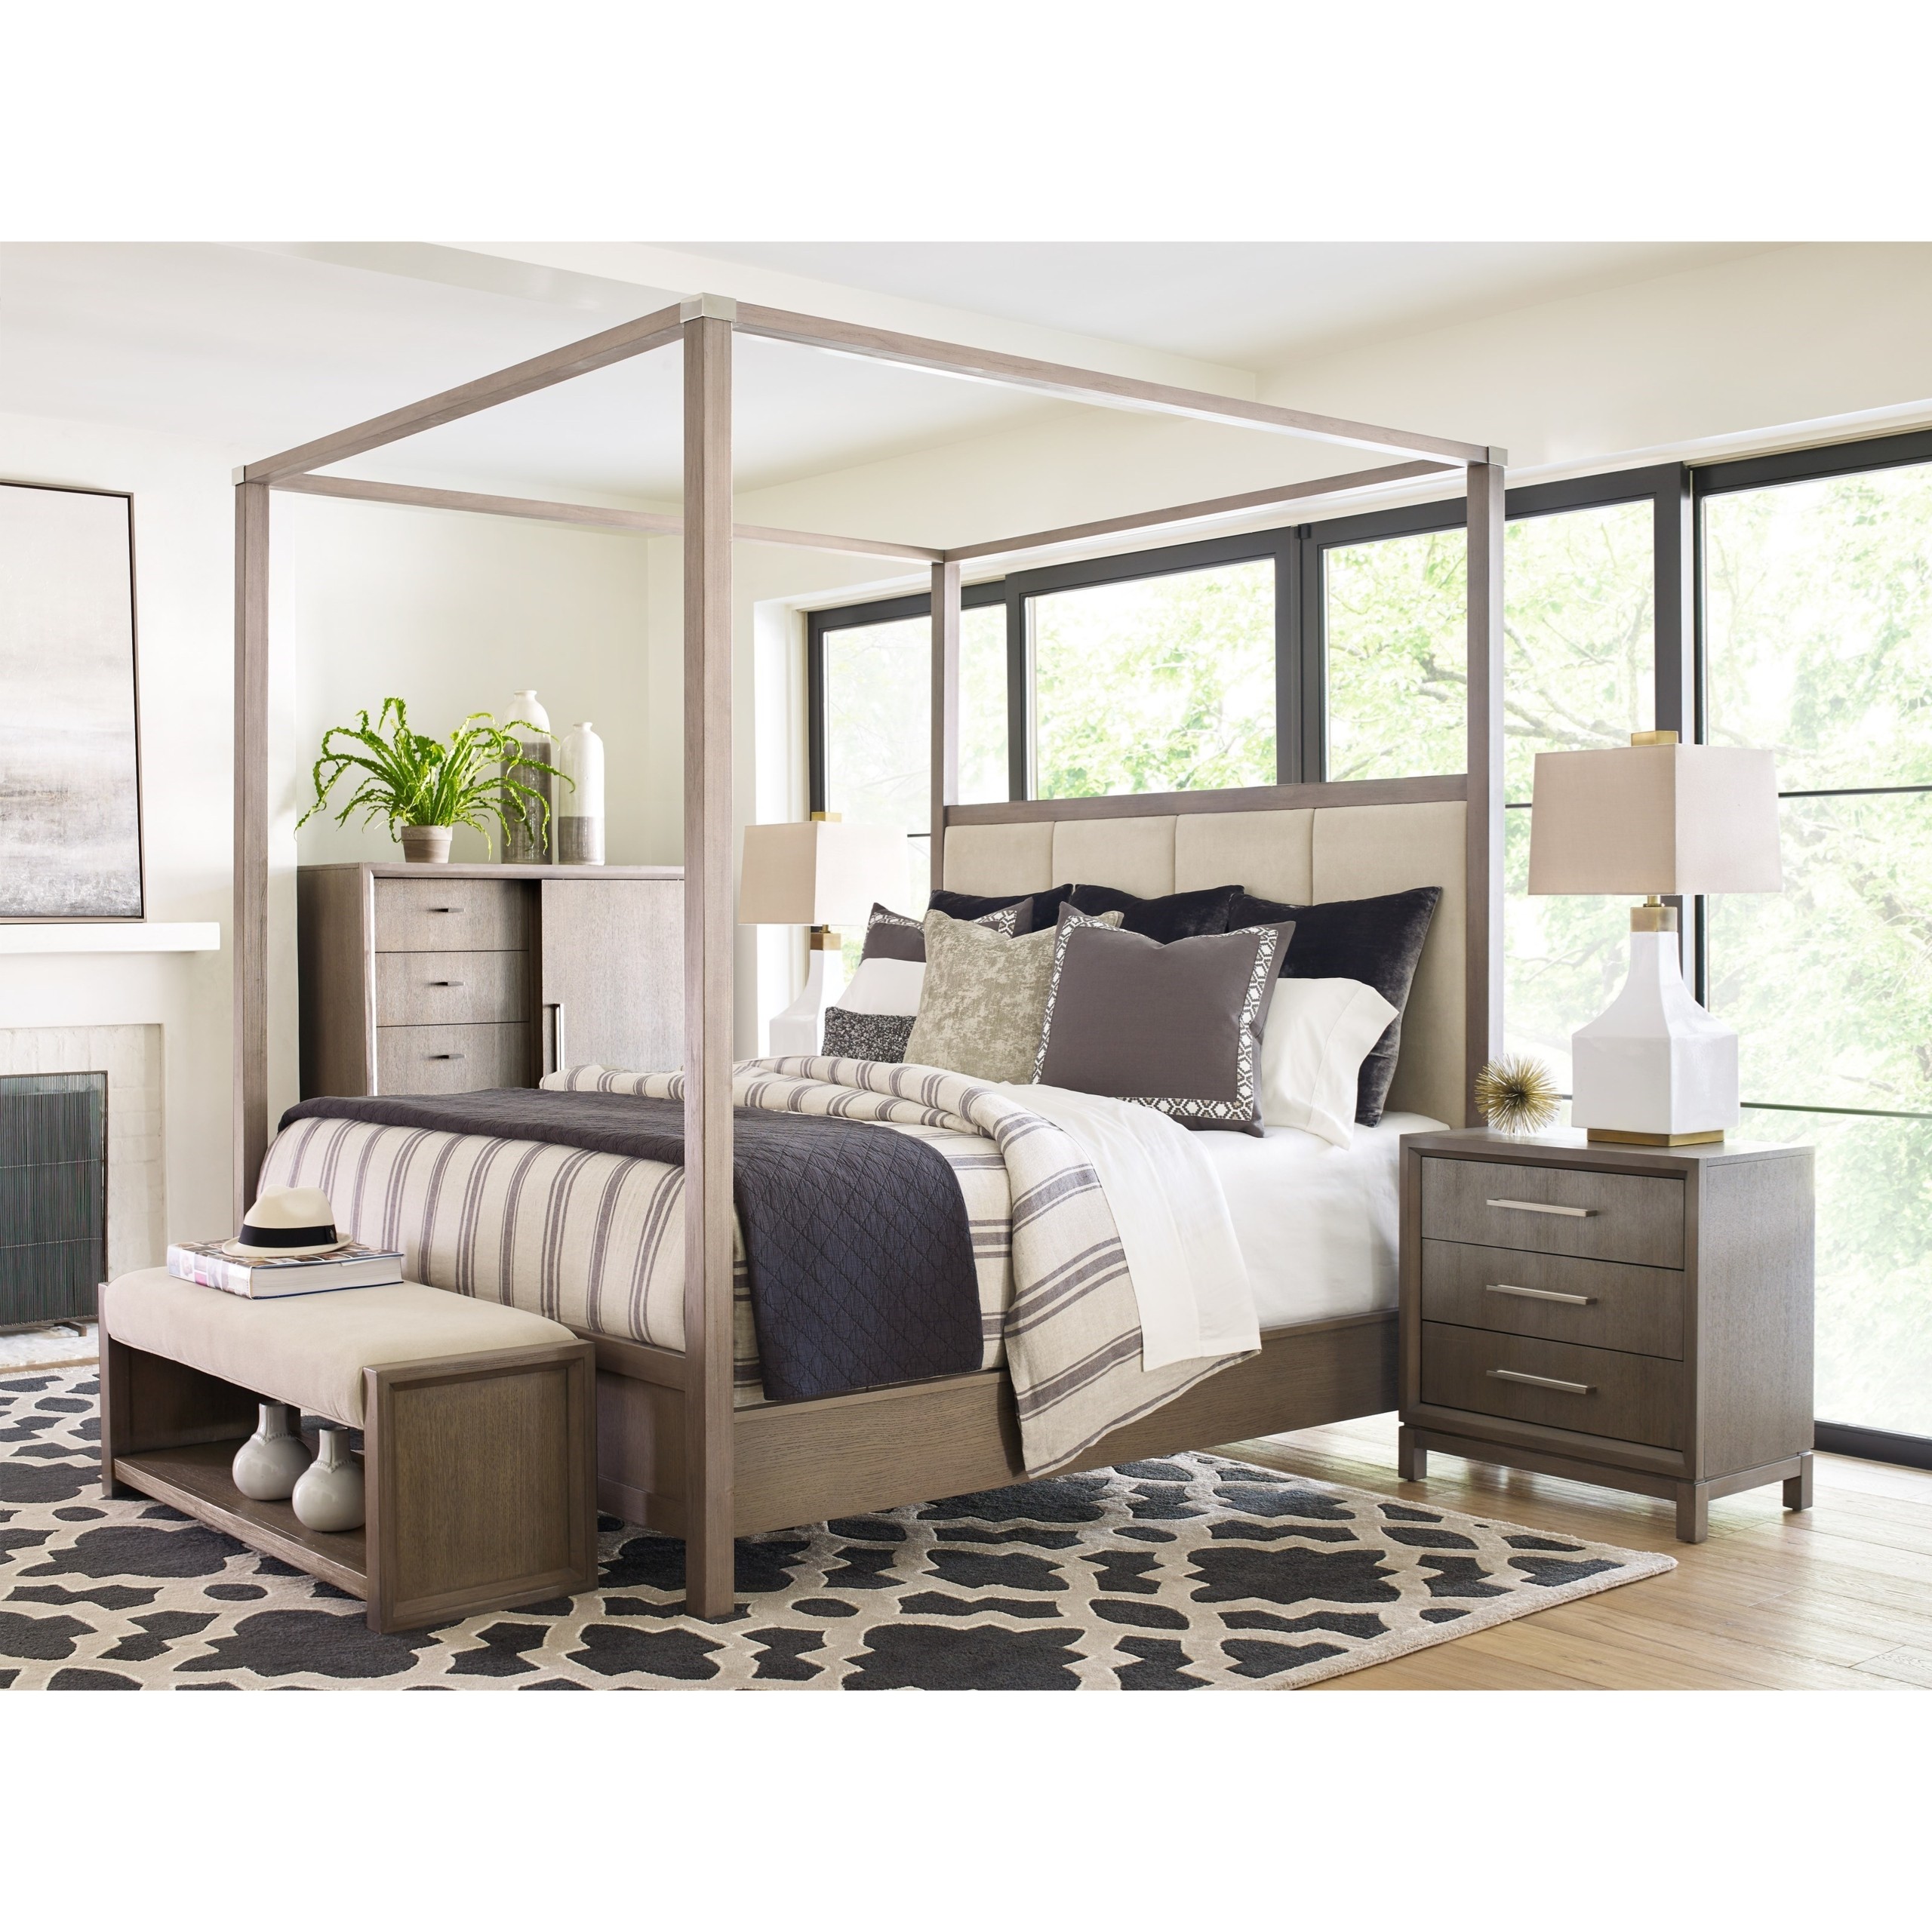 Rachael ray home by legacy classic high line king